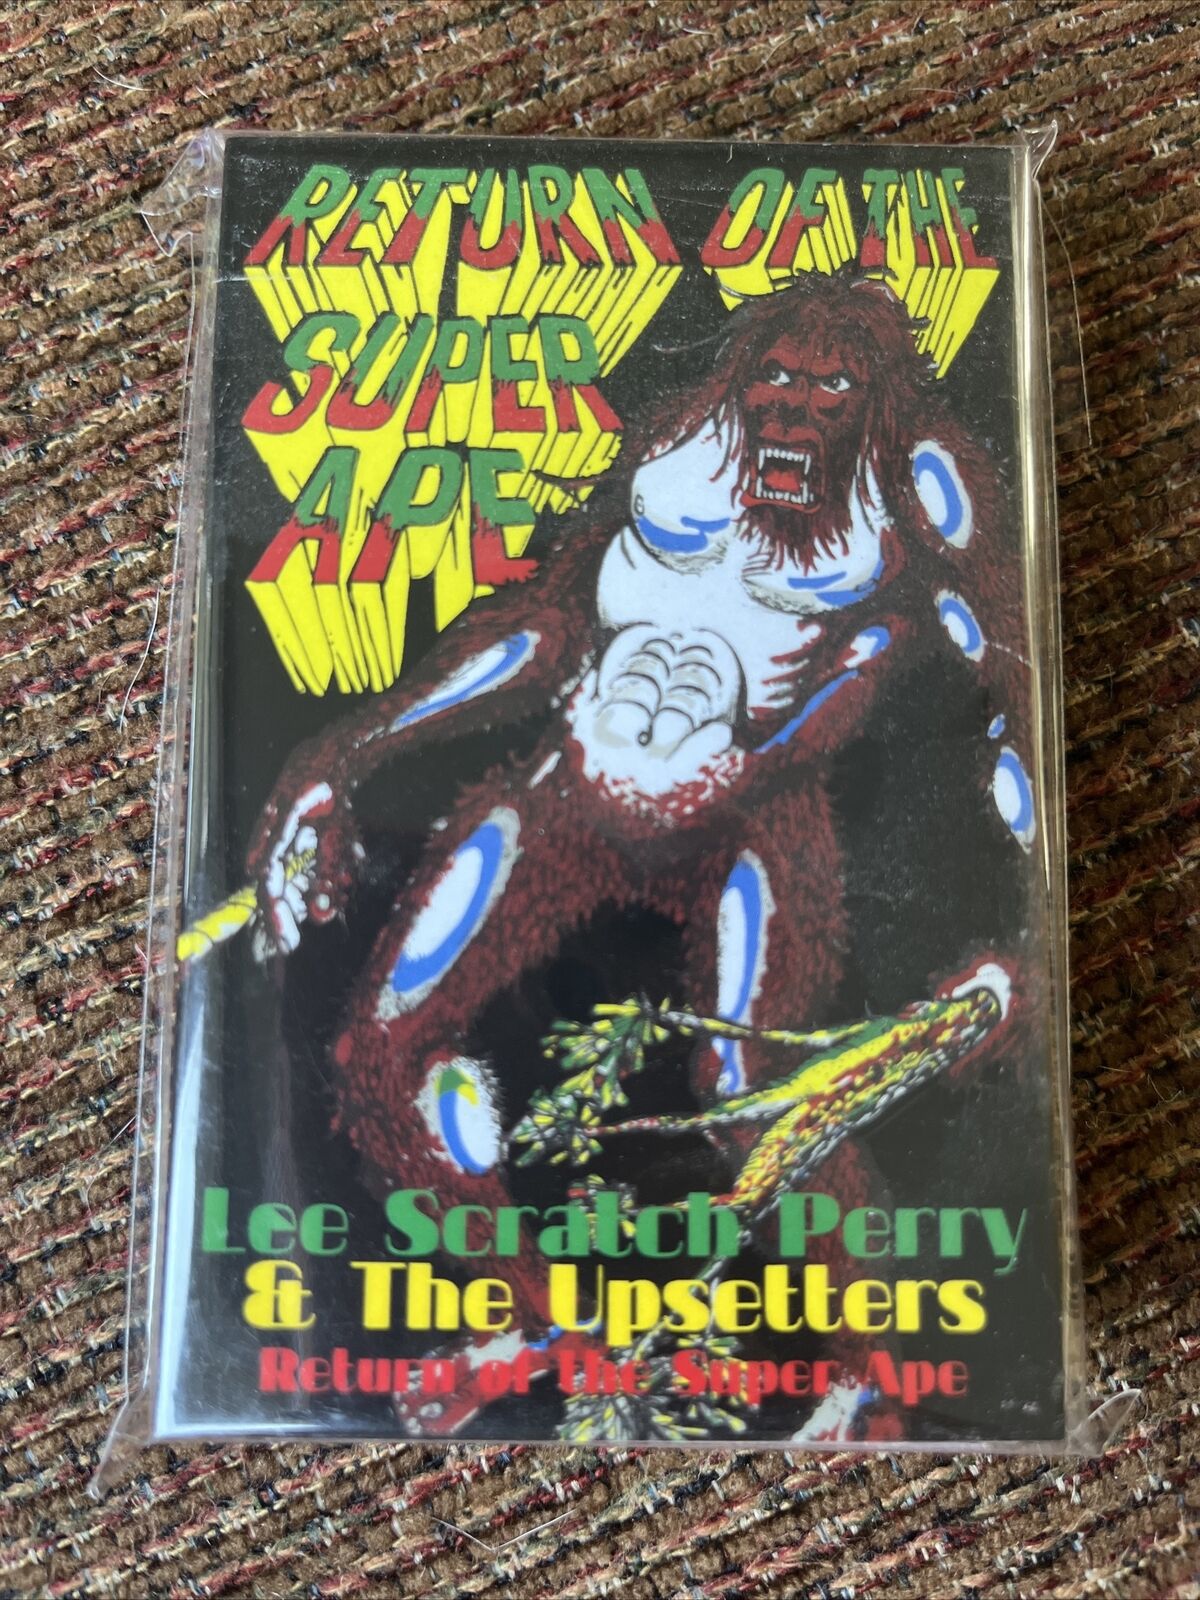 Lee Scratch Perry & The Upsetters - Return Of The Super Ape - Cassette Tape NEW